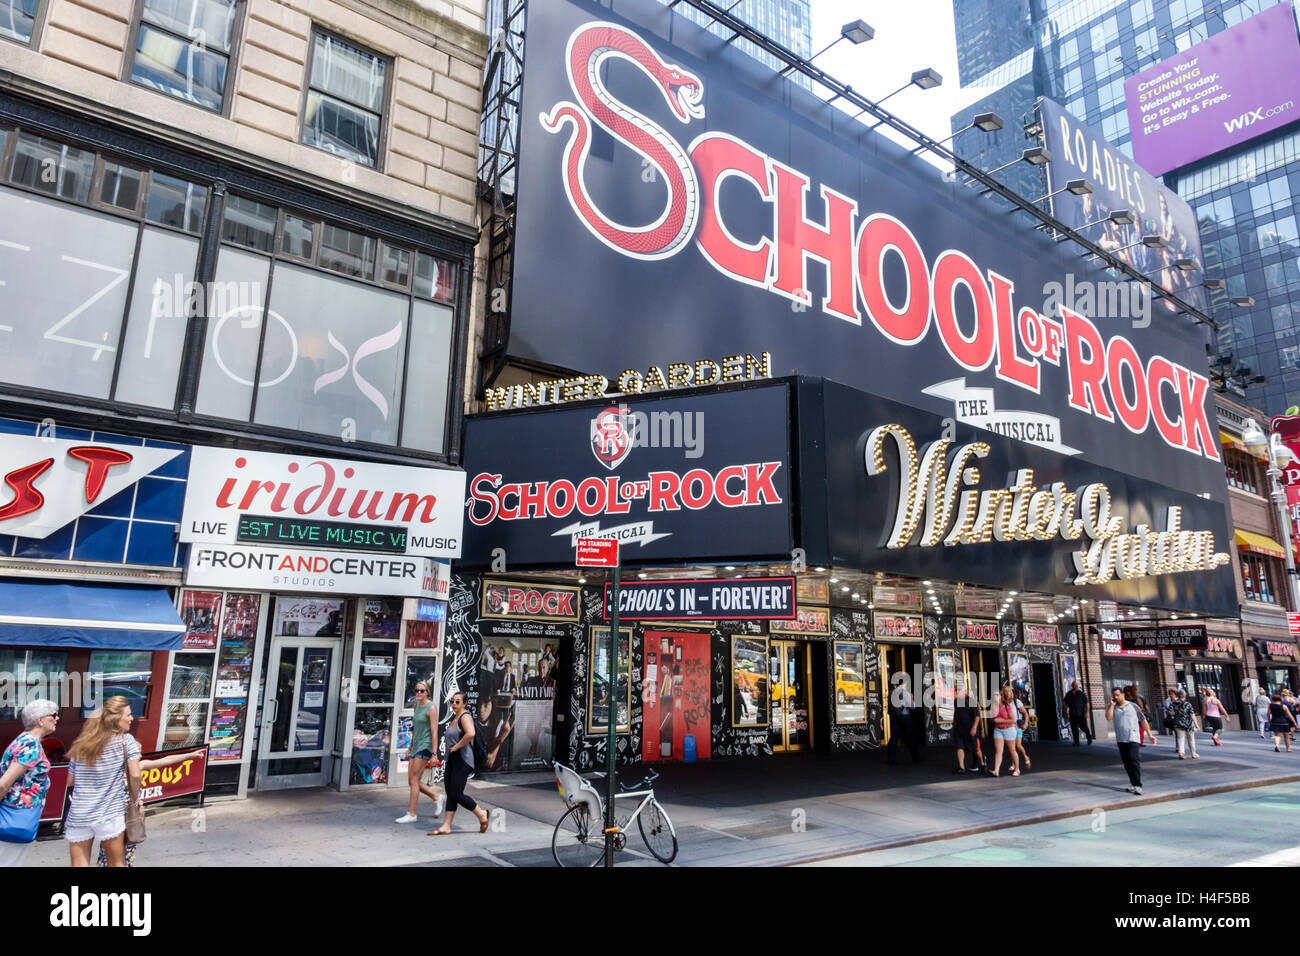 New York City,NY NYC Manhattan,Midtown,Broadway,theater district,Winter Garden Theatre,School of Rock,musical,marquee,adult adults,woman female women, Stock Photo